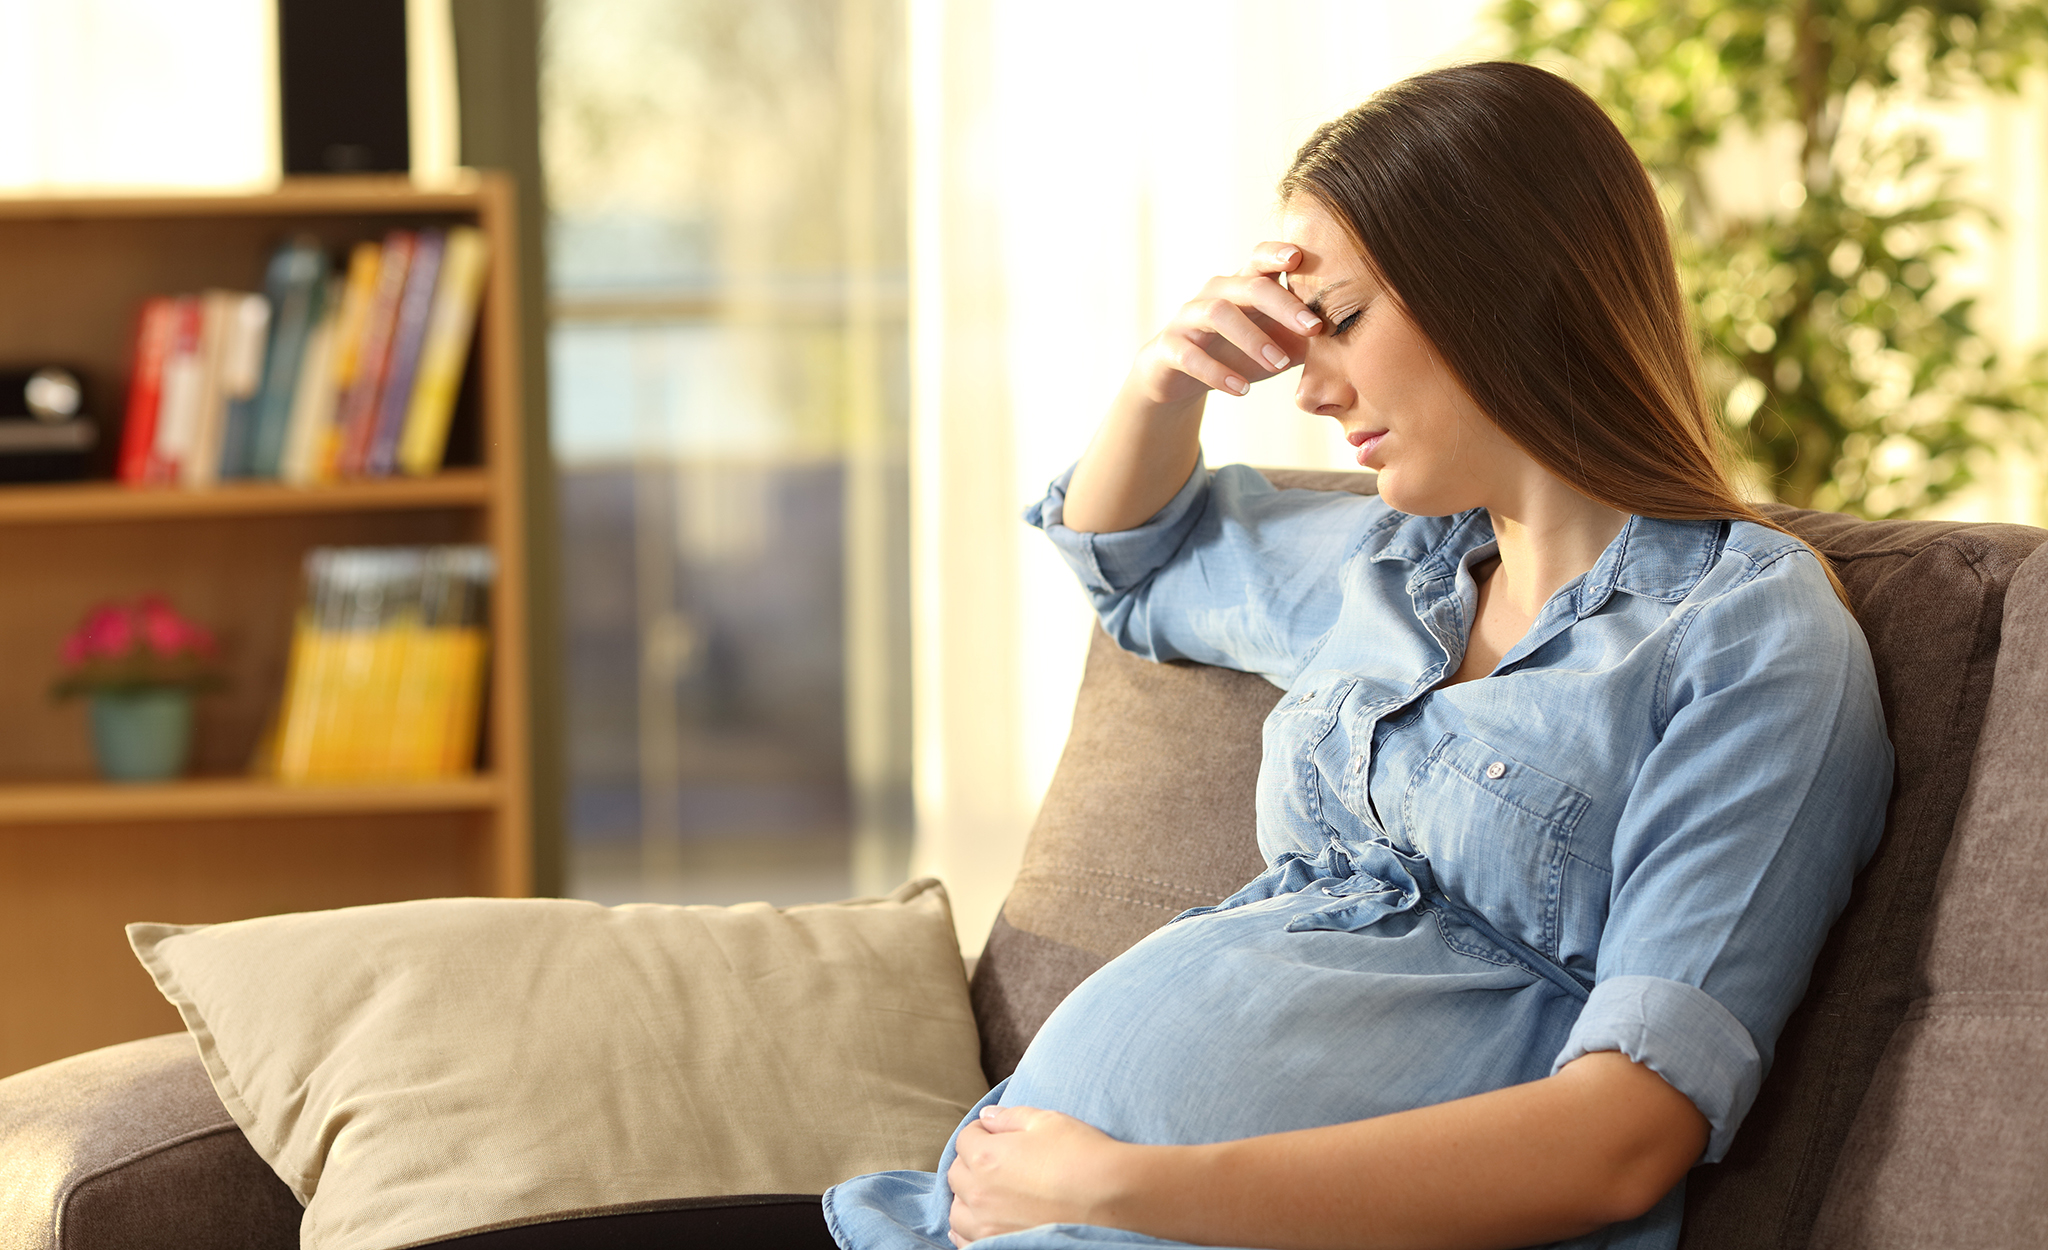 UM psychology researchers have found that identifying and treating anxiety sensitivity in pregnant women may help lessen the chances of their developing postpartum and parental distress. The results, published in the Journal of Midwifery and Women’s Health, recommend larger studies to better understand the connection between anxiety sensitivity and postpartum distress. Adobe Stock photo